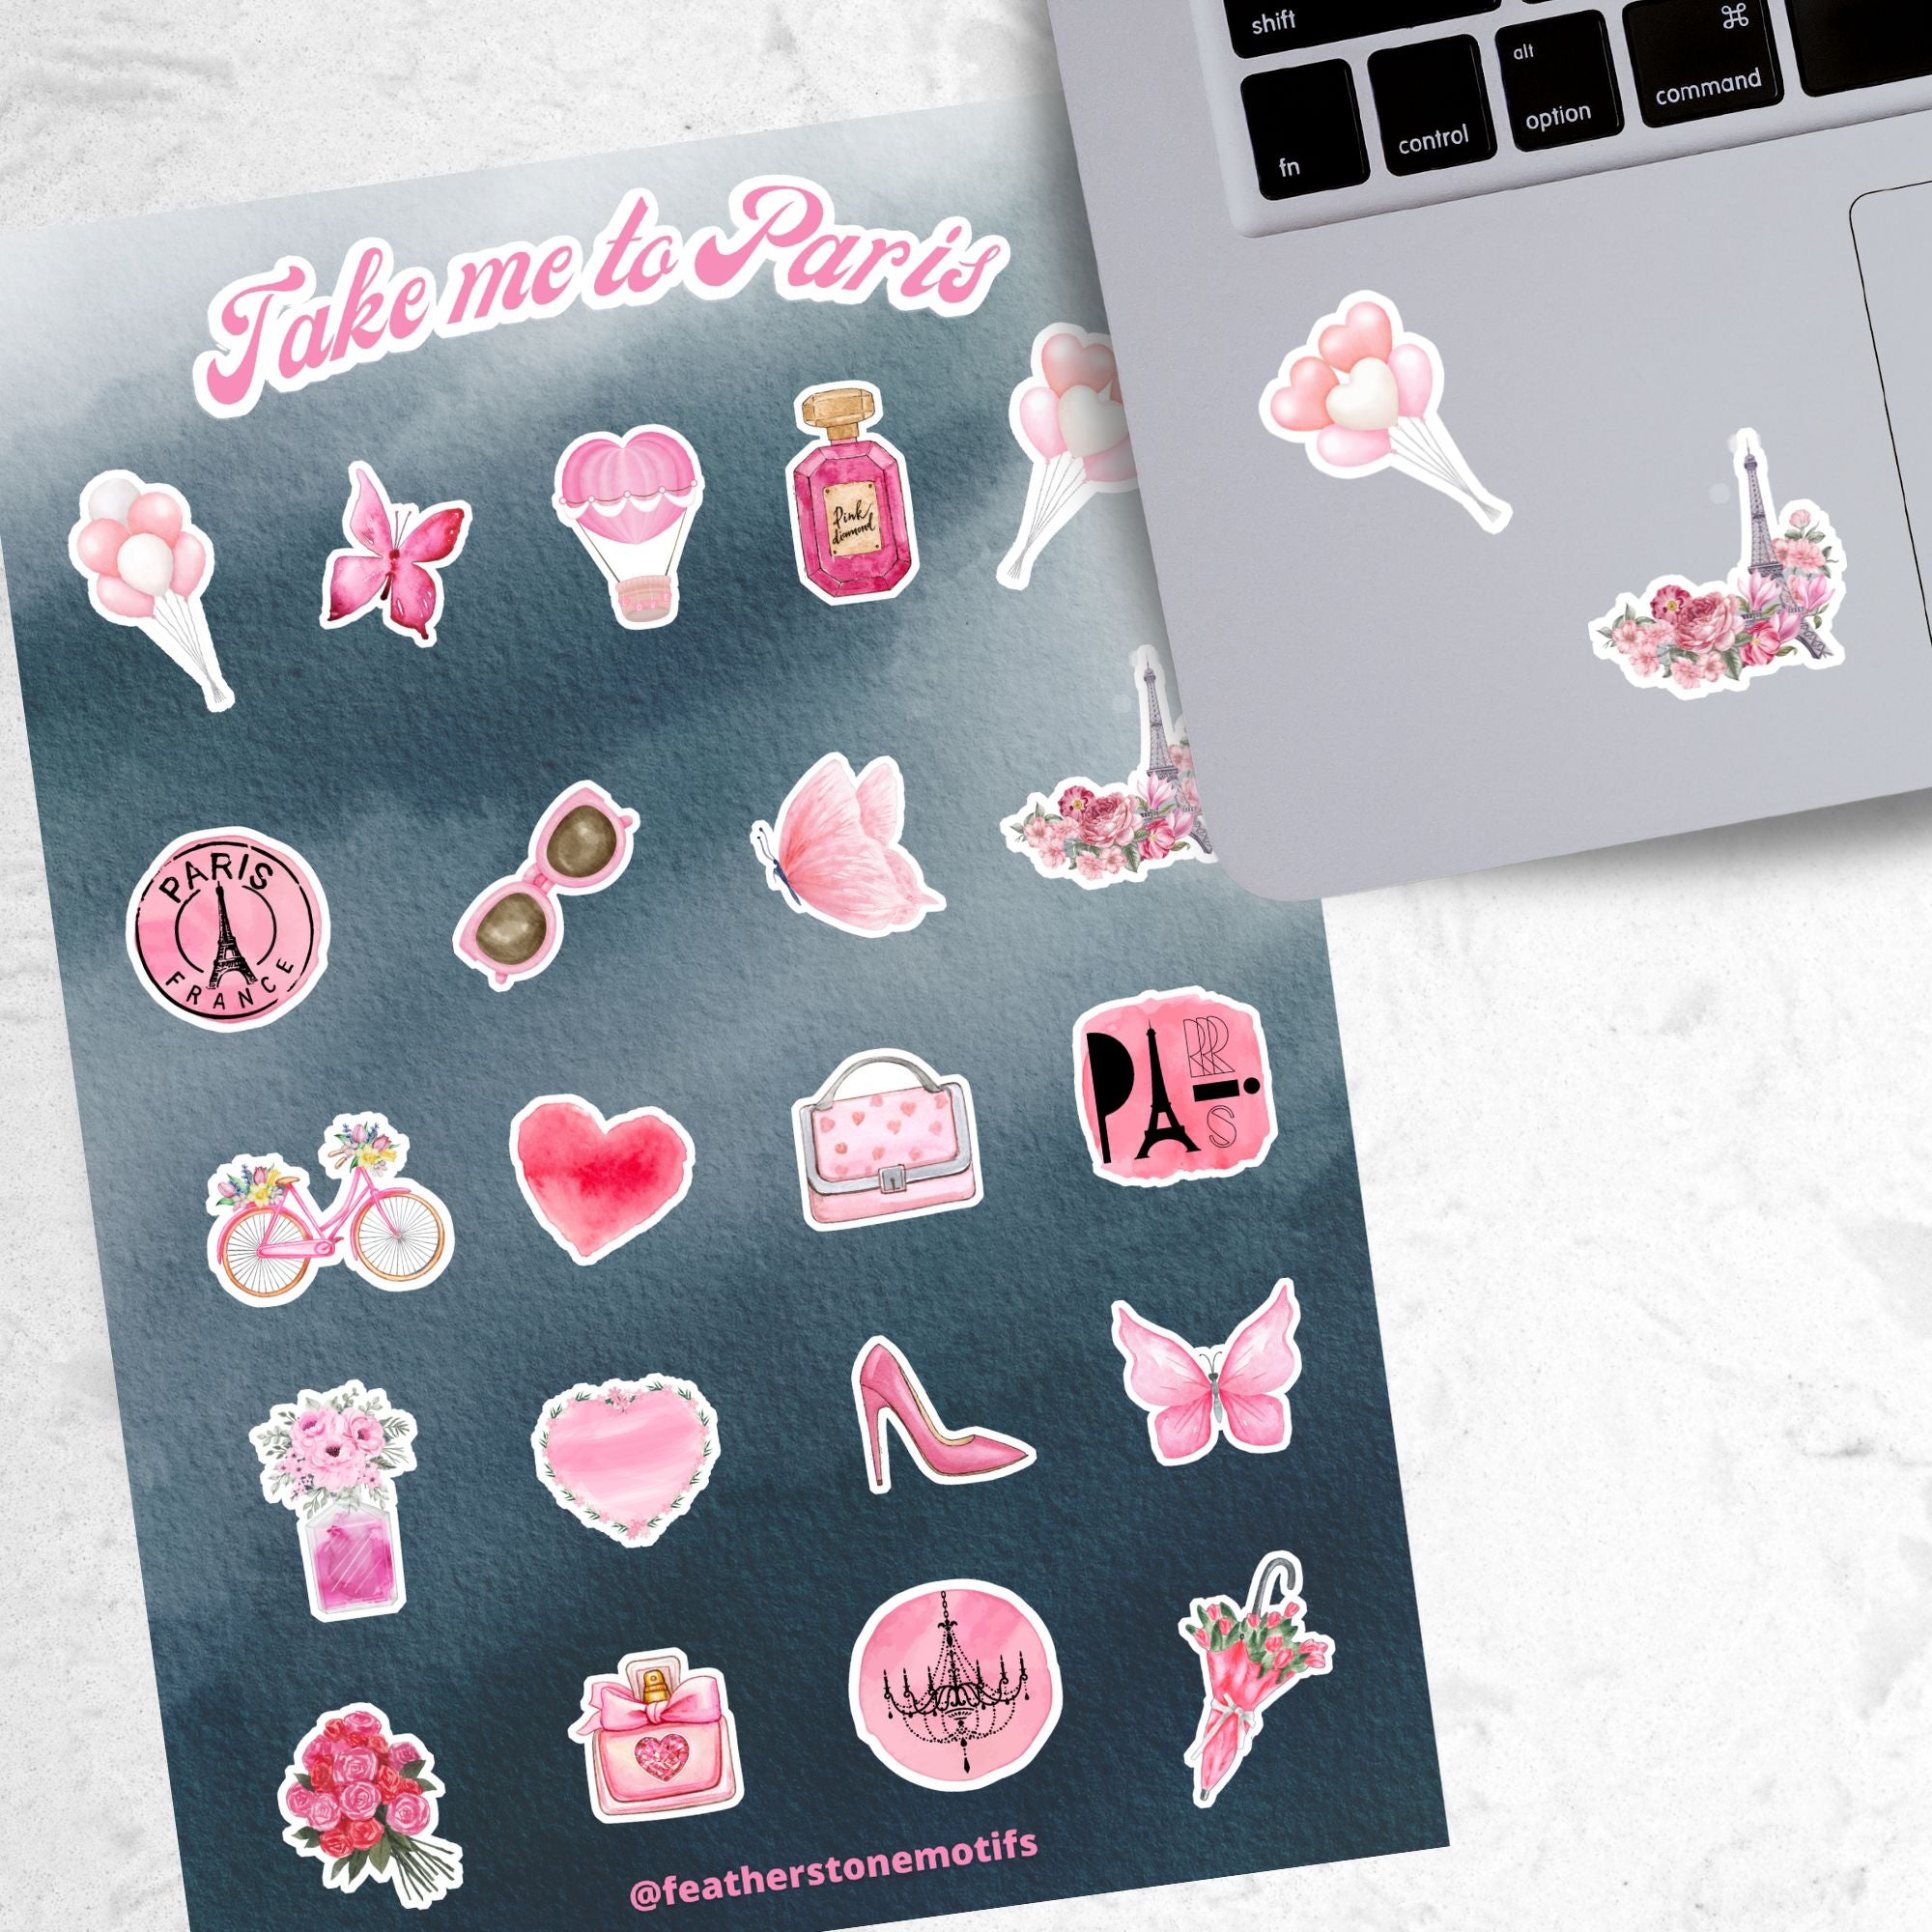  Celebrate everything Paris with this pink aesthetic on a gray background sticker sheet! Images include the Eifel Tower, perfume, balloons, and flowers. This image shows the sticker sheet next to an open laptop with stickers of balloons, and the Eifel Tower surrounded by flowers, applied below the keyboard.